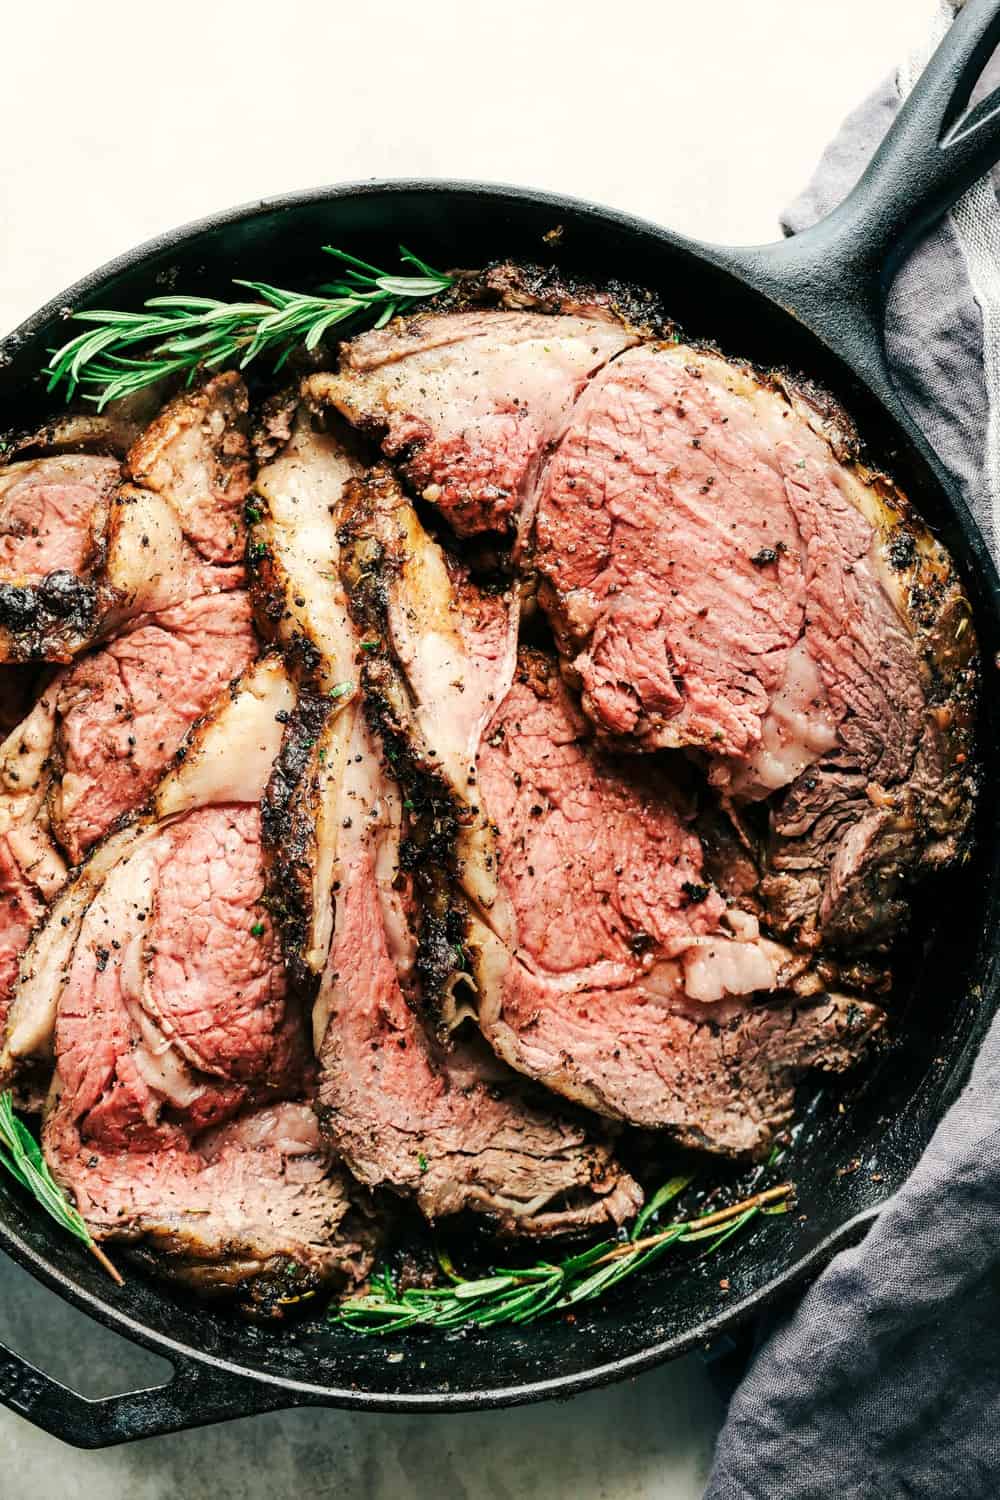 Best Prime Rib Recipe Cooking in the Pan - How to Cook Prime Rib Perfectly | The Recipe Critic by Alyssa Rivers